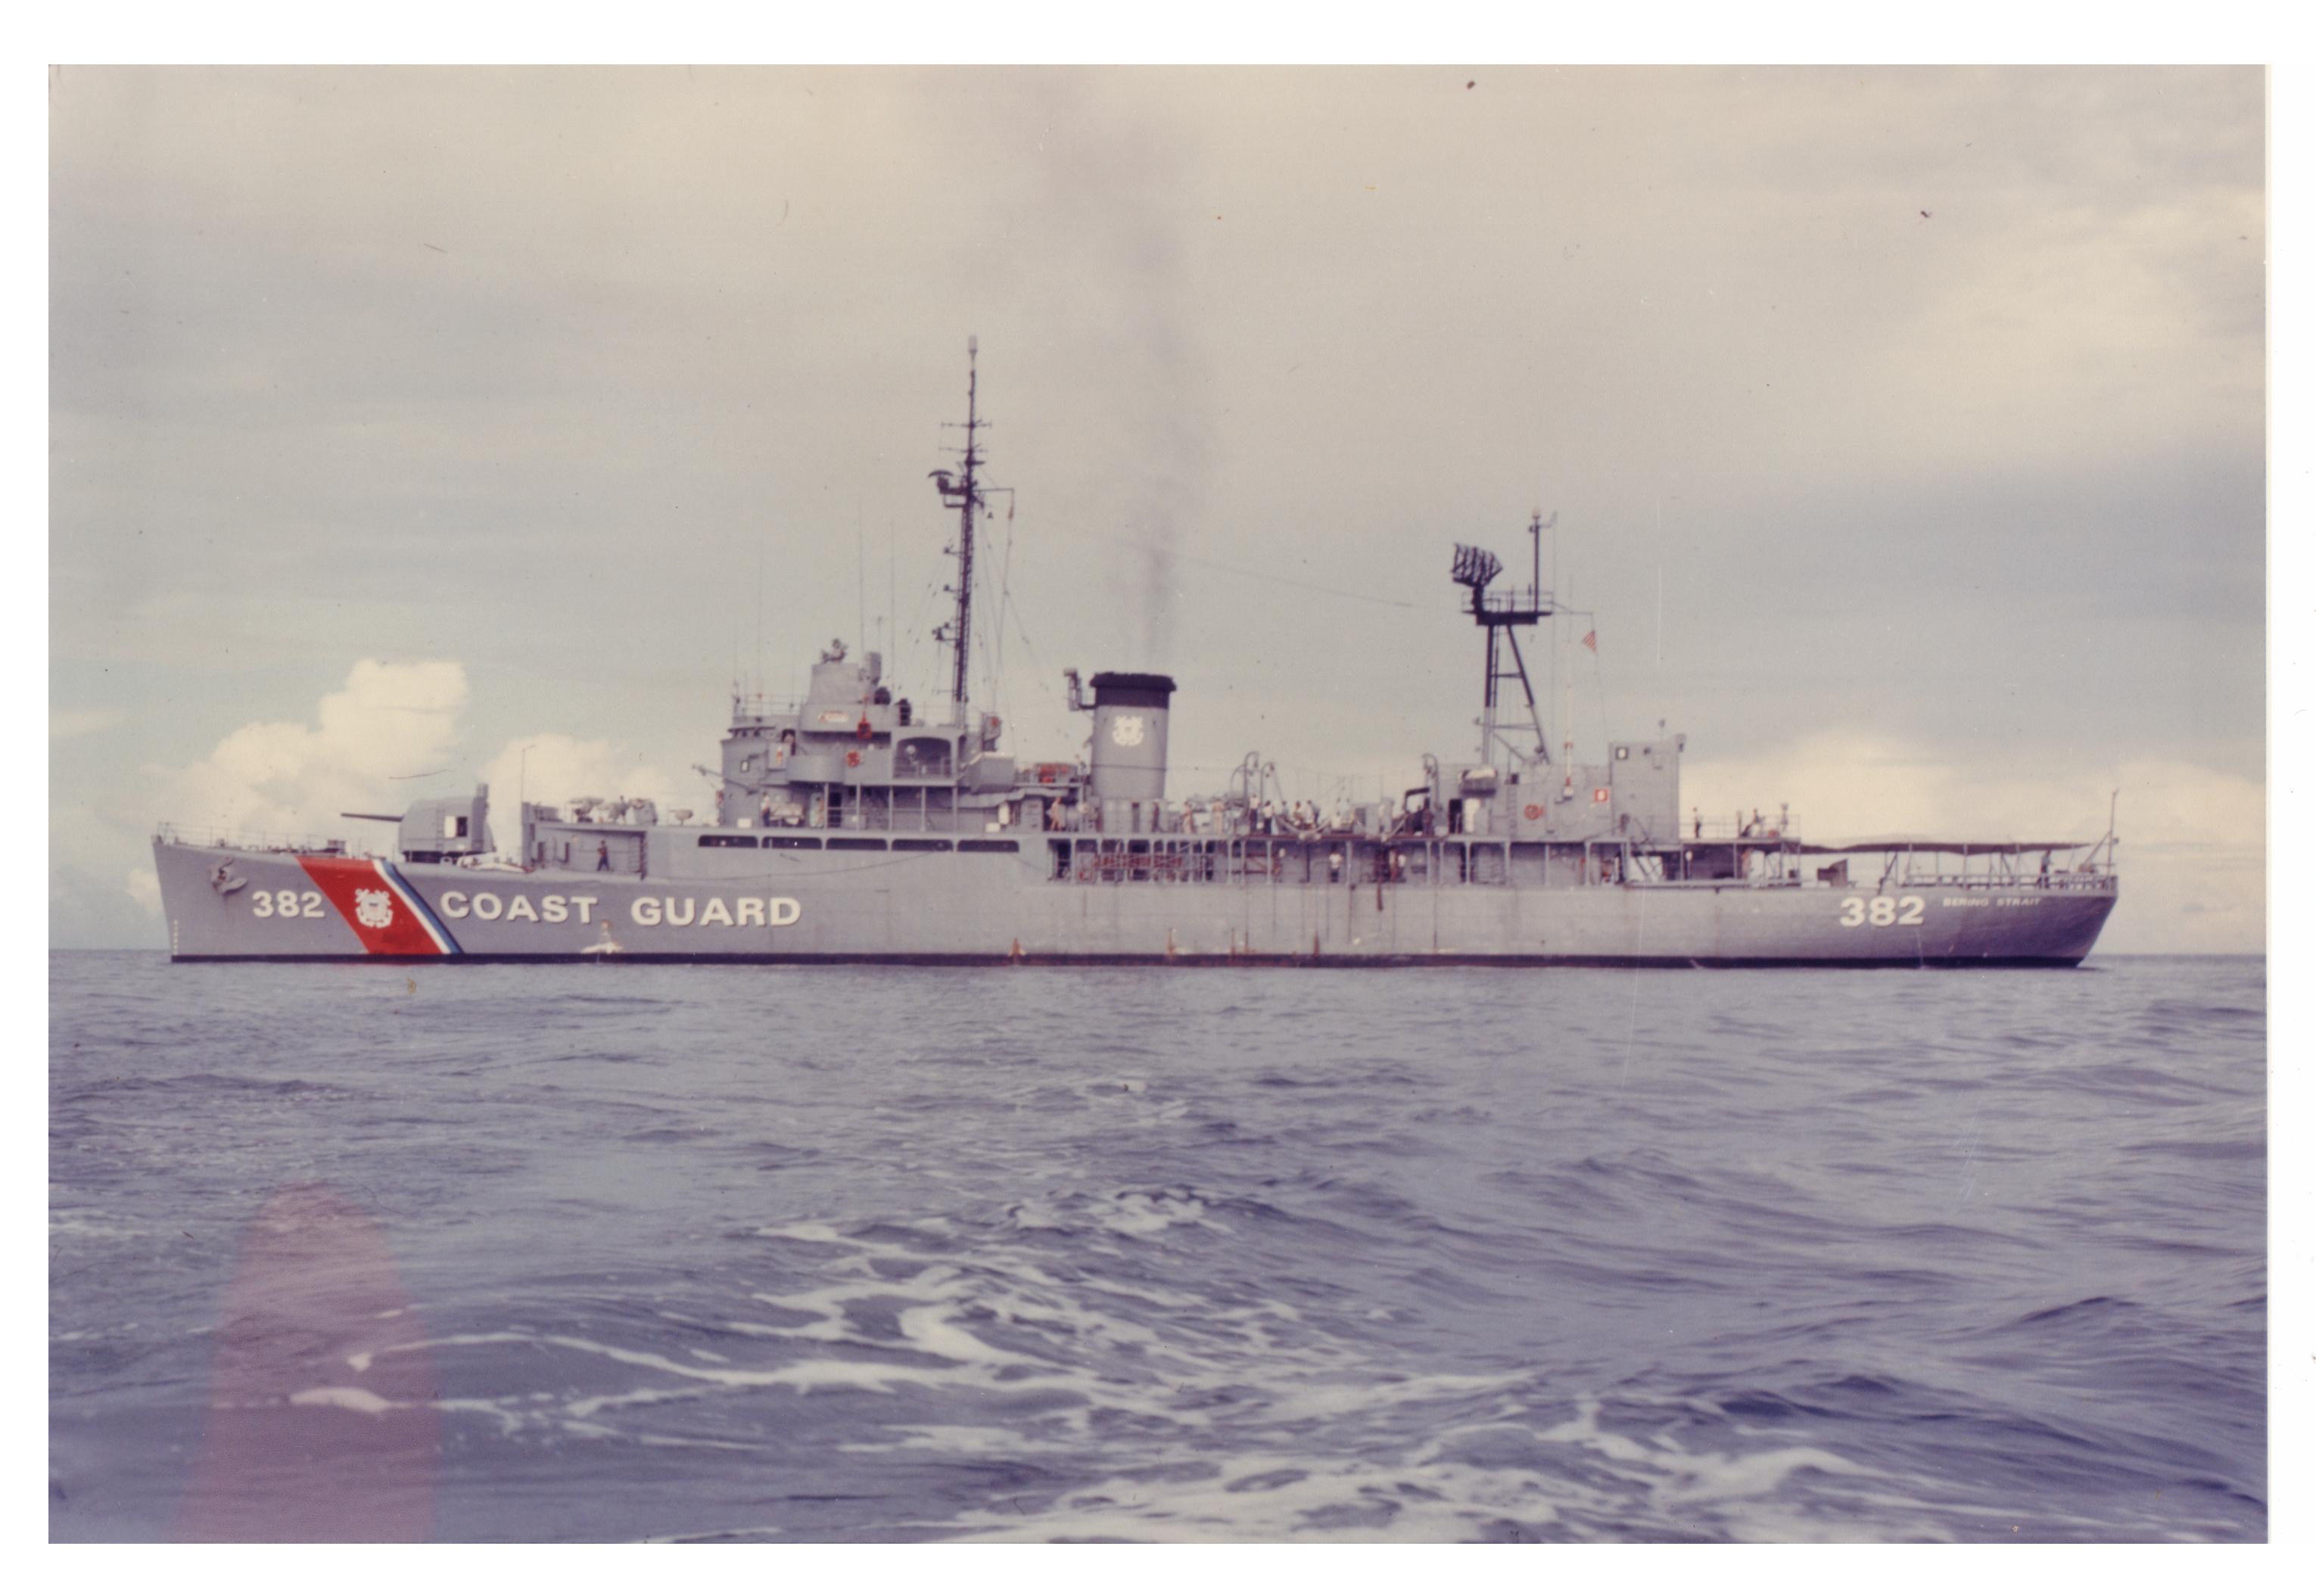 Profile photograph of High-Endurance Cutter Bering Strait in rare paint scheme of haze gray with Coast Guard “Racing Stripe.” Mackinaw. (Mrs. Misa White)